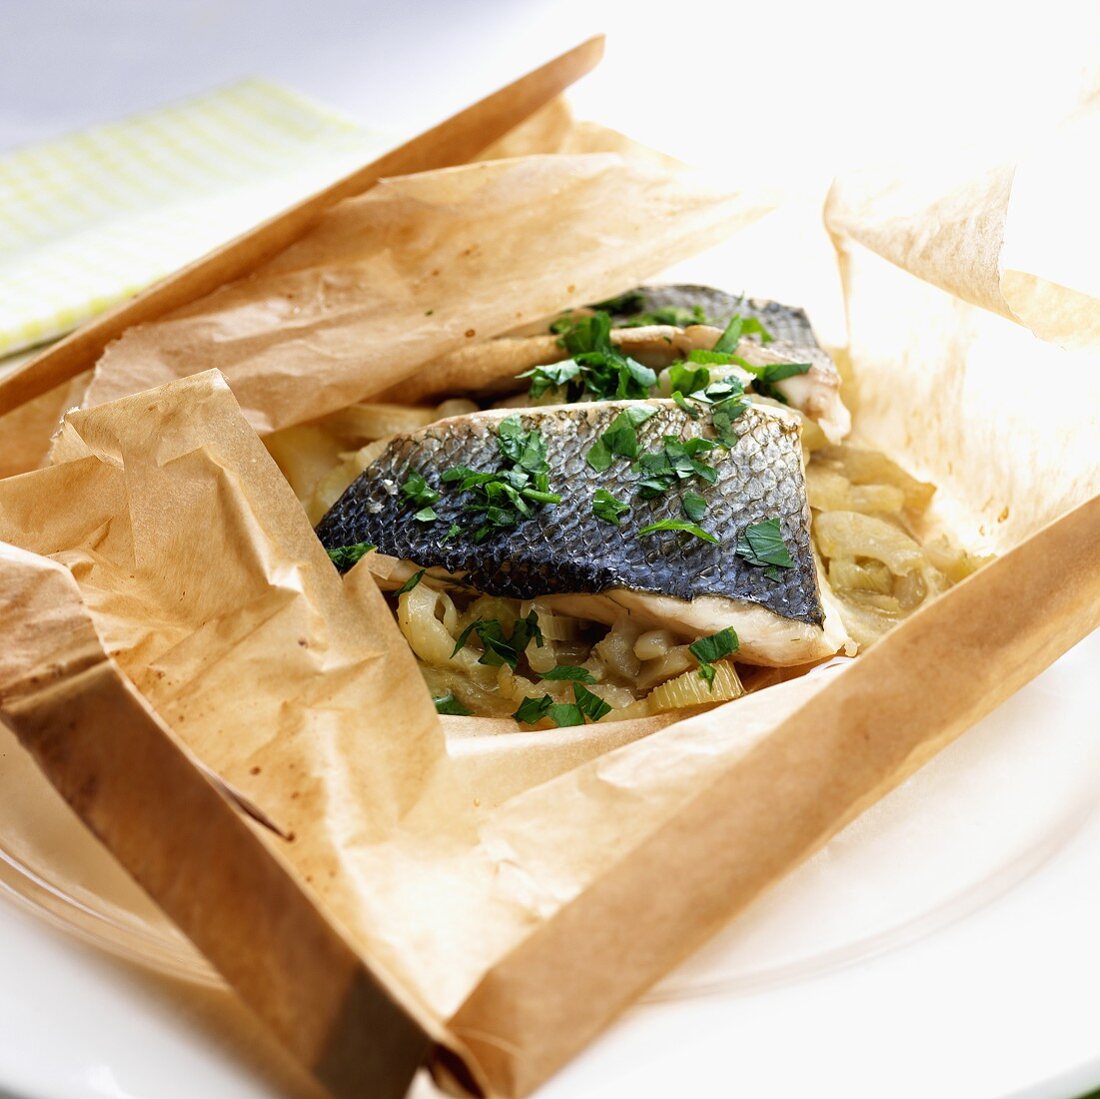 Sea bass on fennel cooked in baking parchment